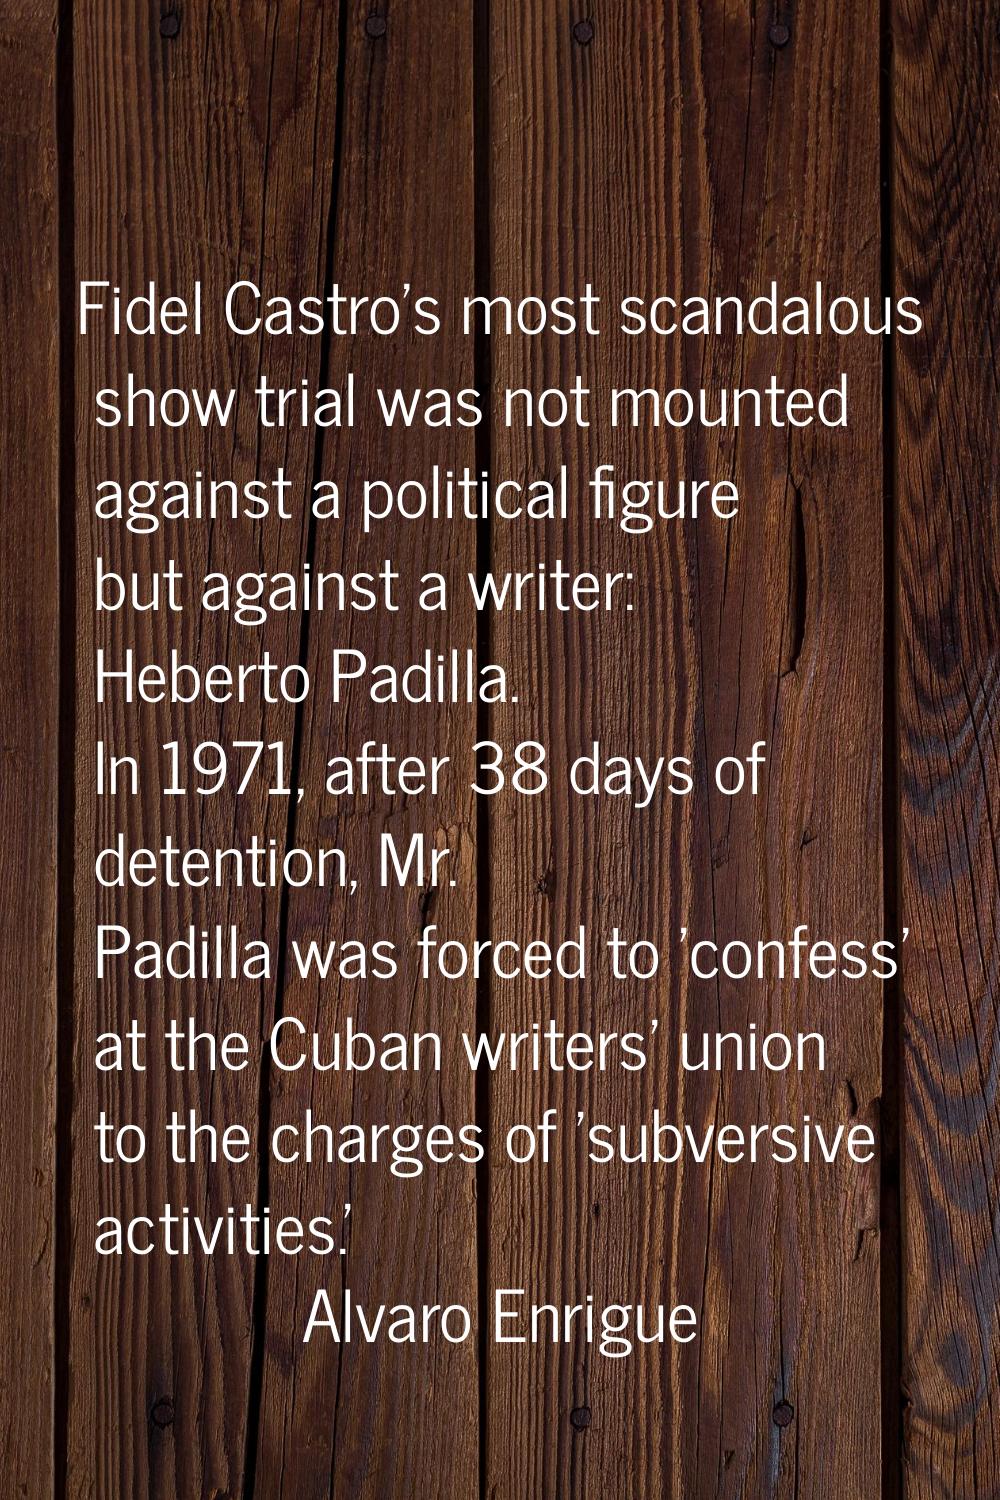 Fidel Castro's most scandalous show trial was not mounted against a political figure but against a 